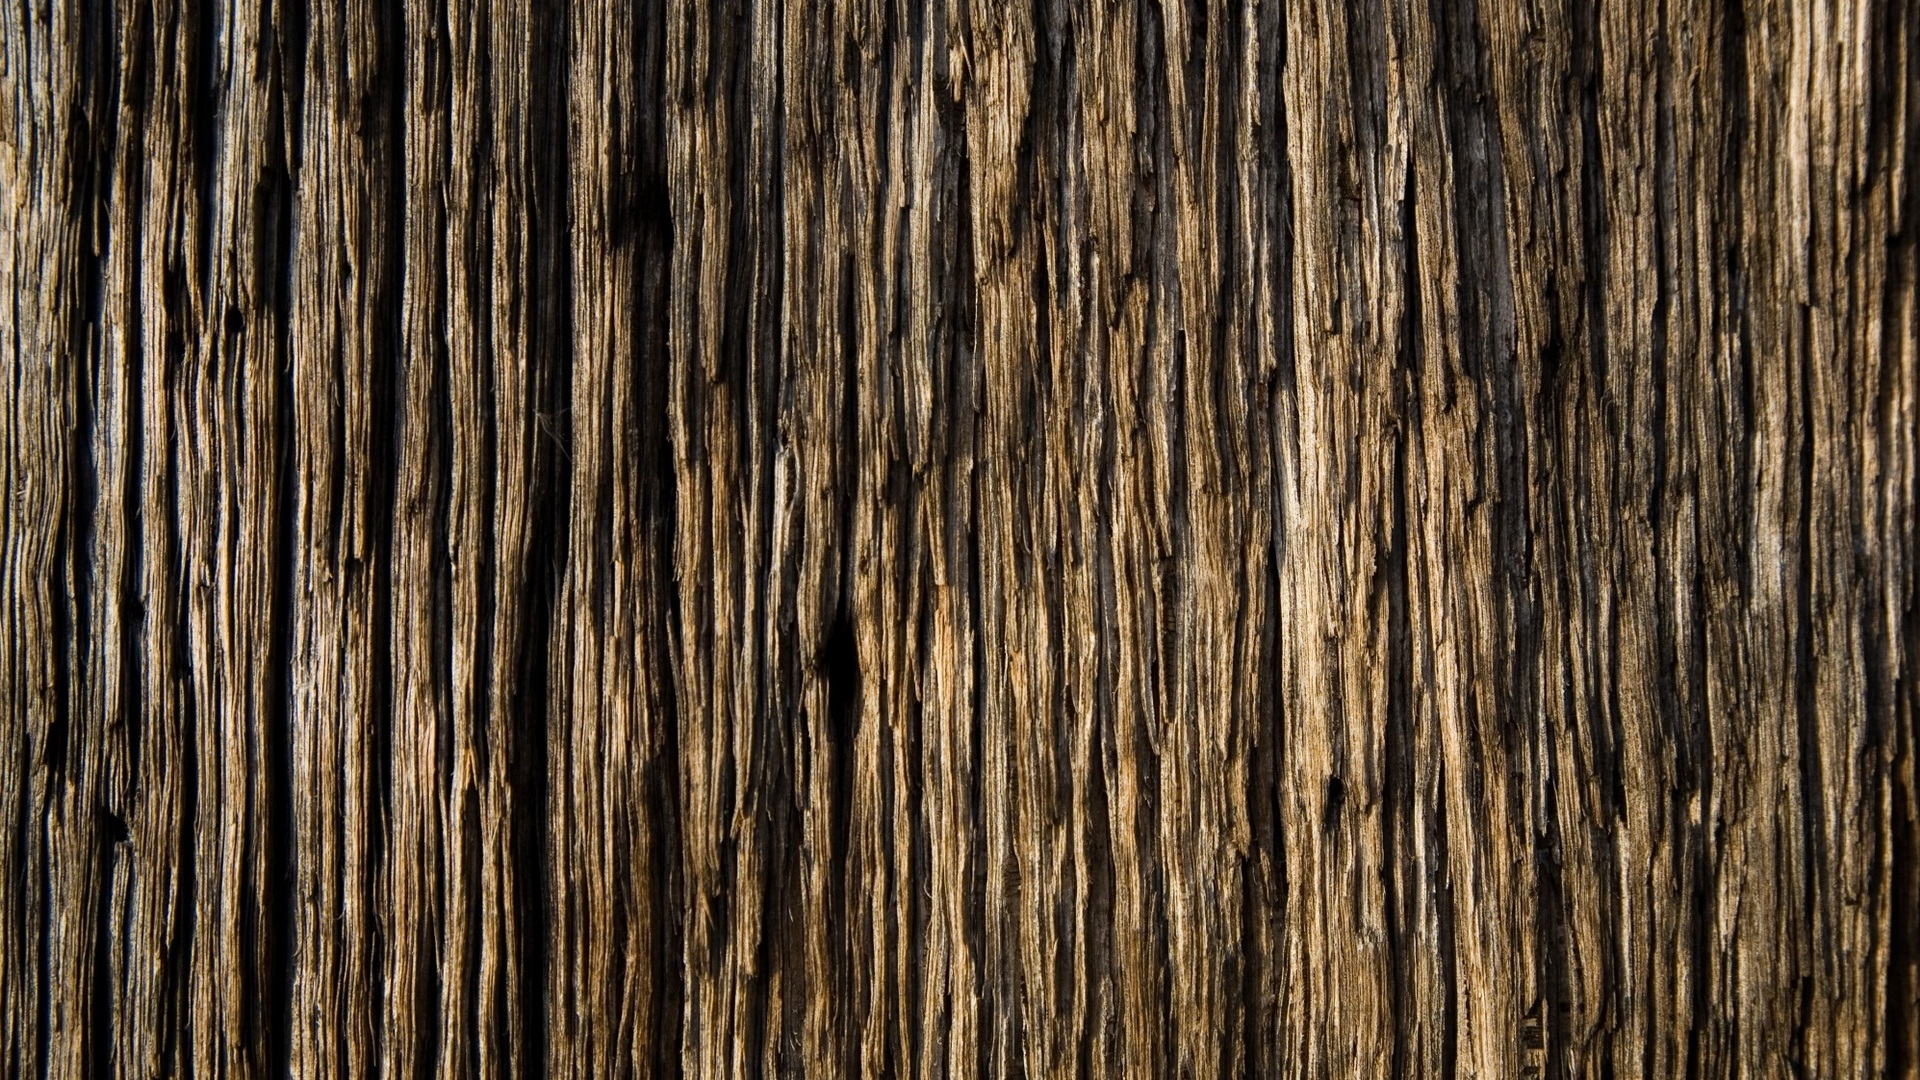 Bark Photos Download The BEST Free Bark Stock Photos  HD Images